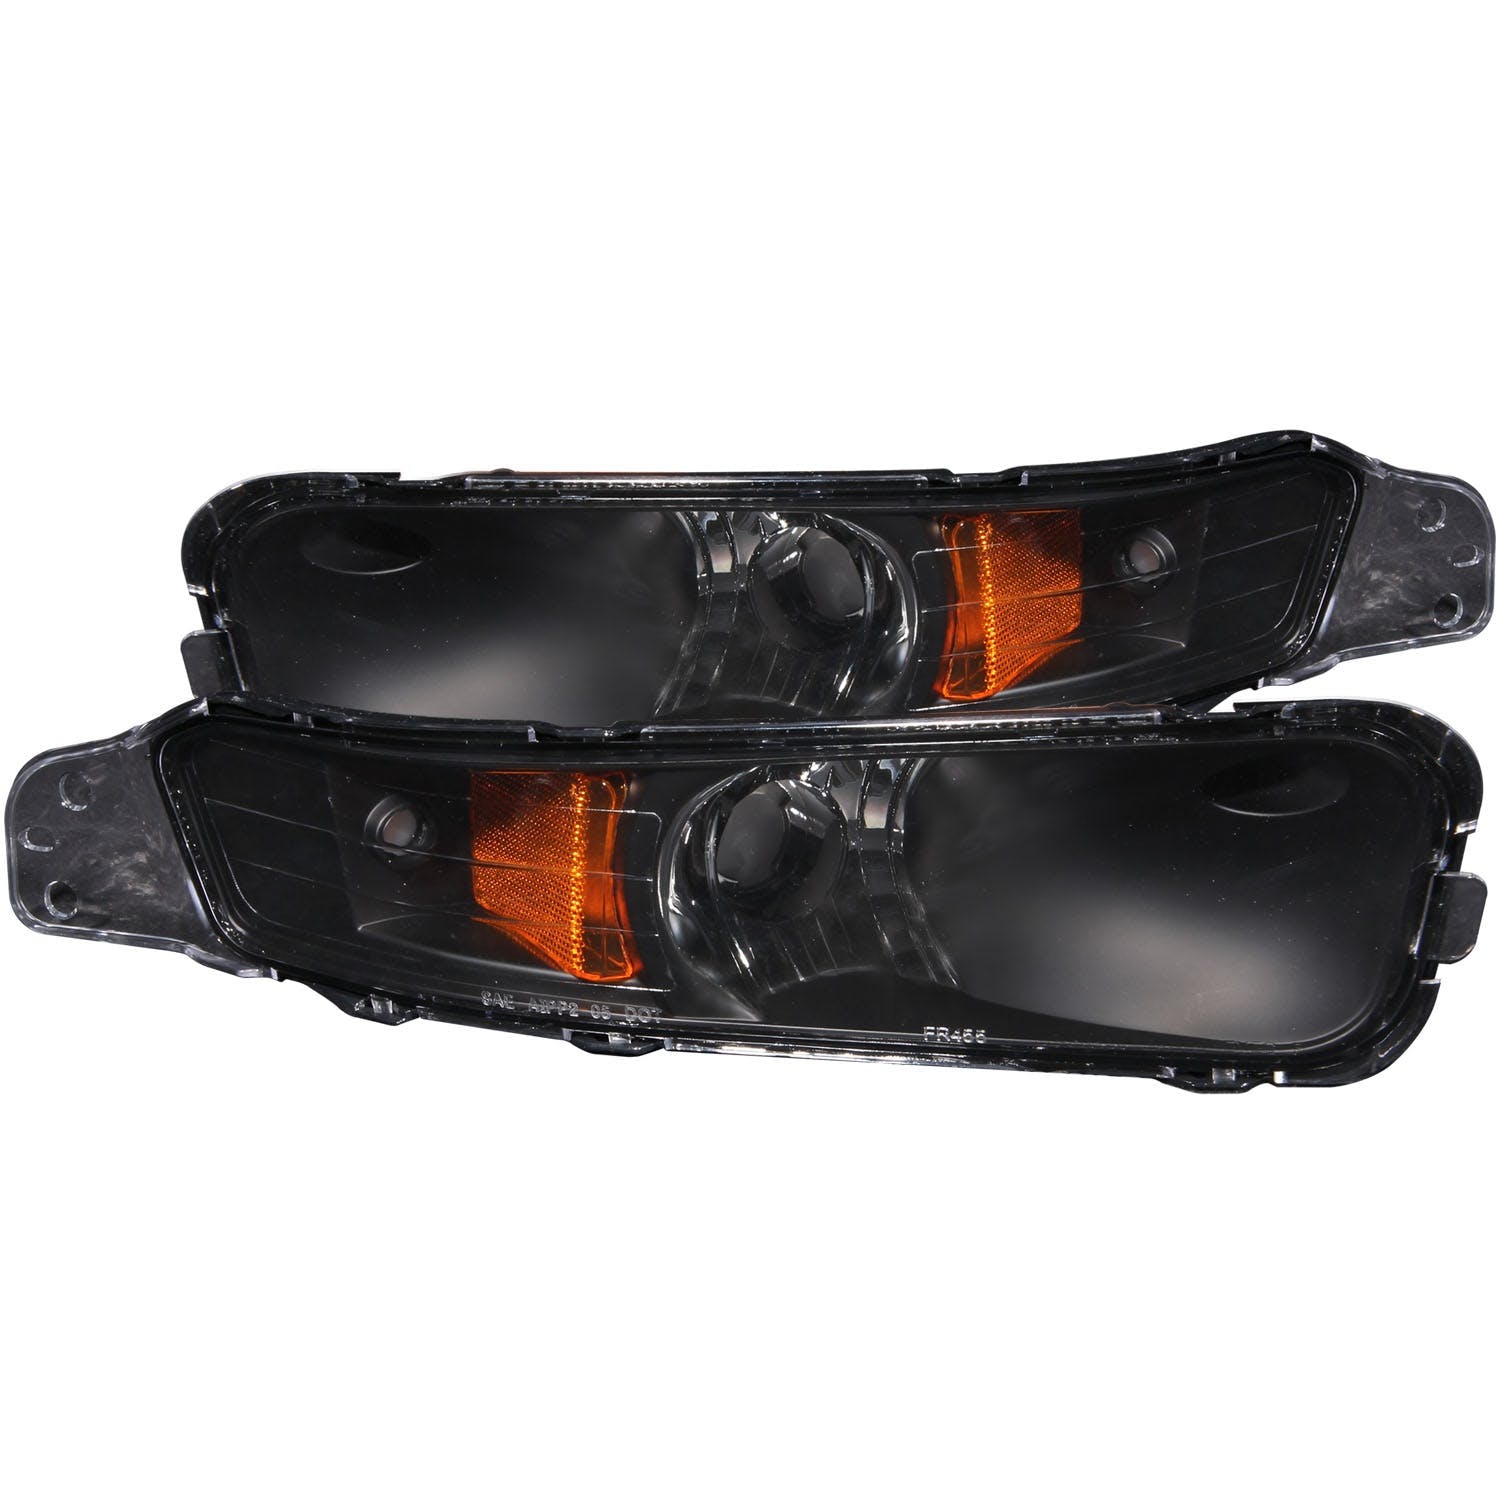 AnzoUSA 511002 Euro Parking Lights Black with Amber Reflector